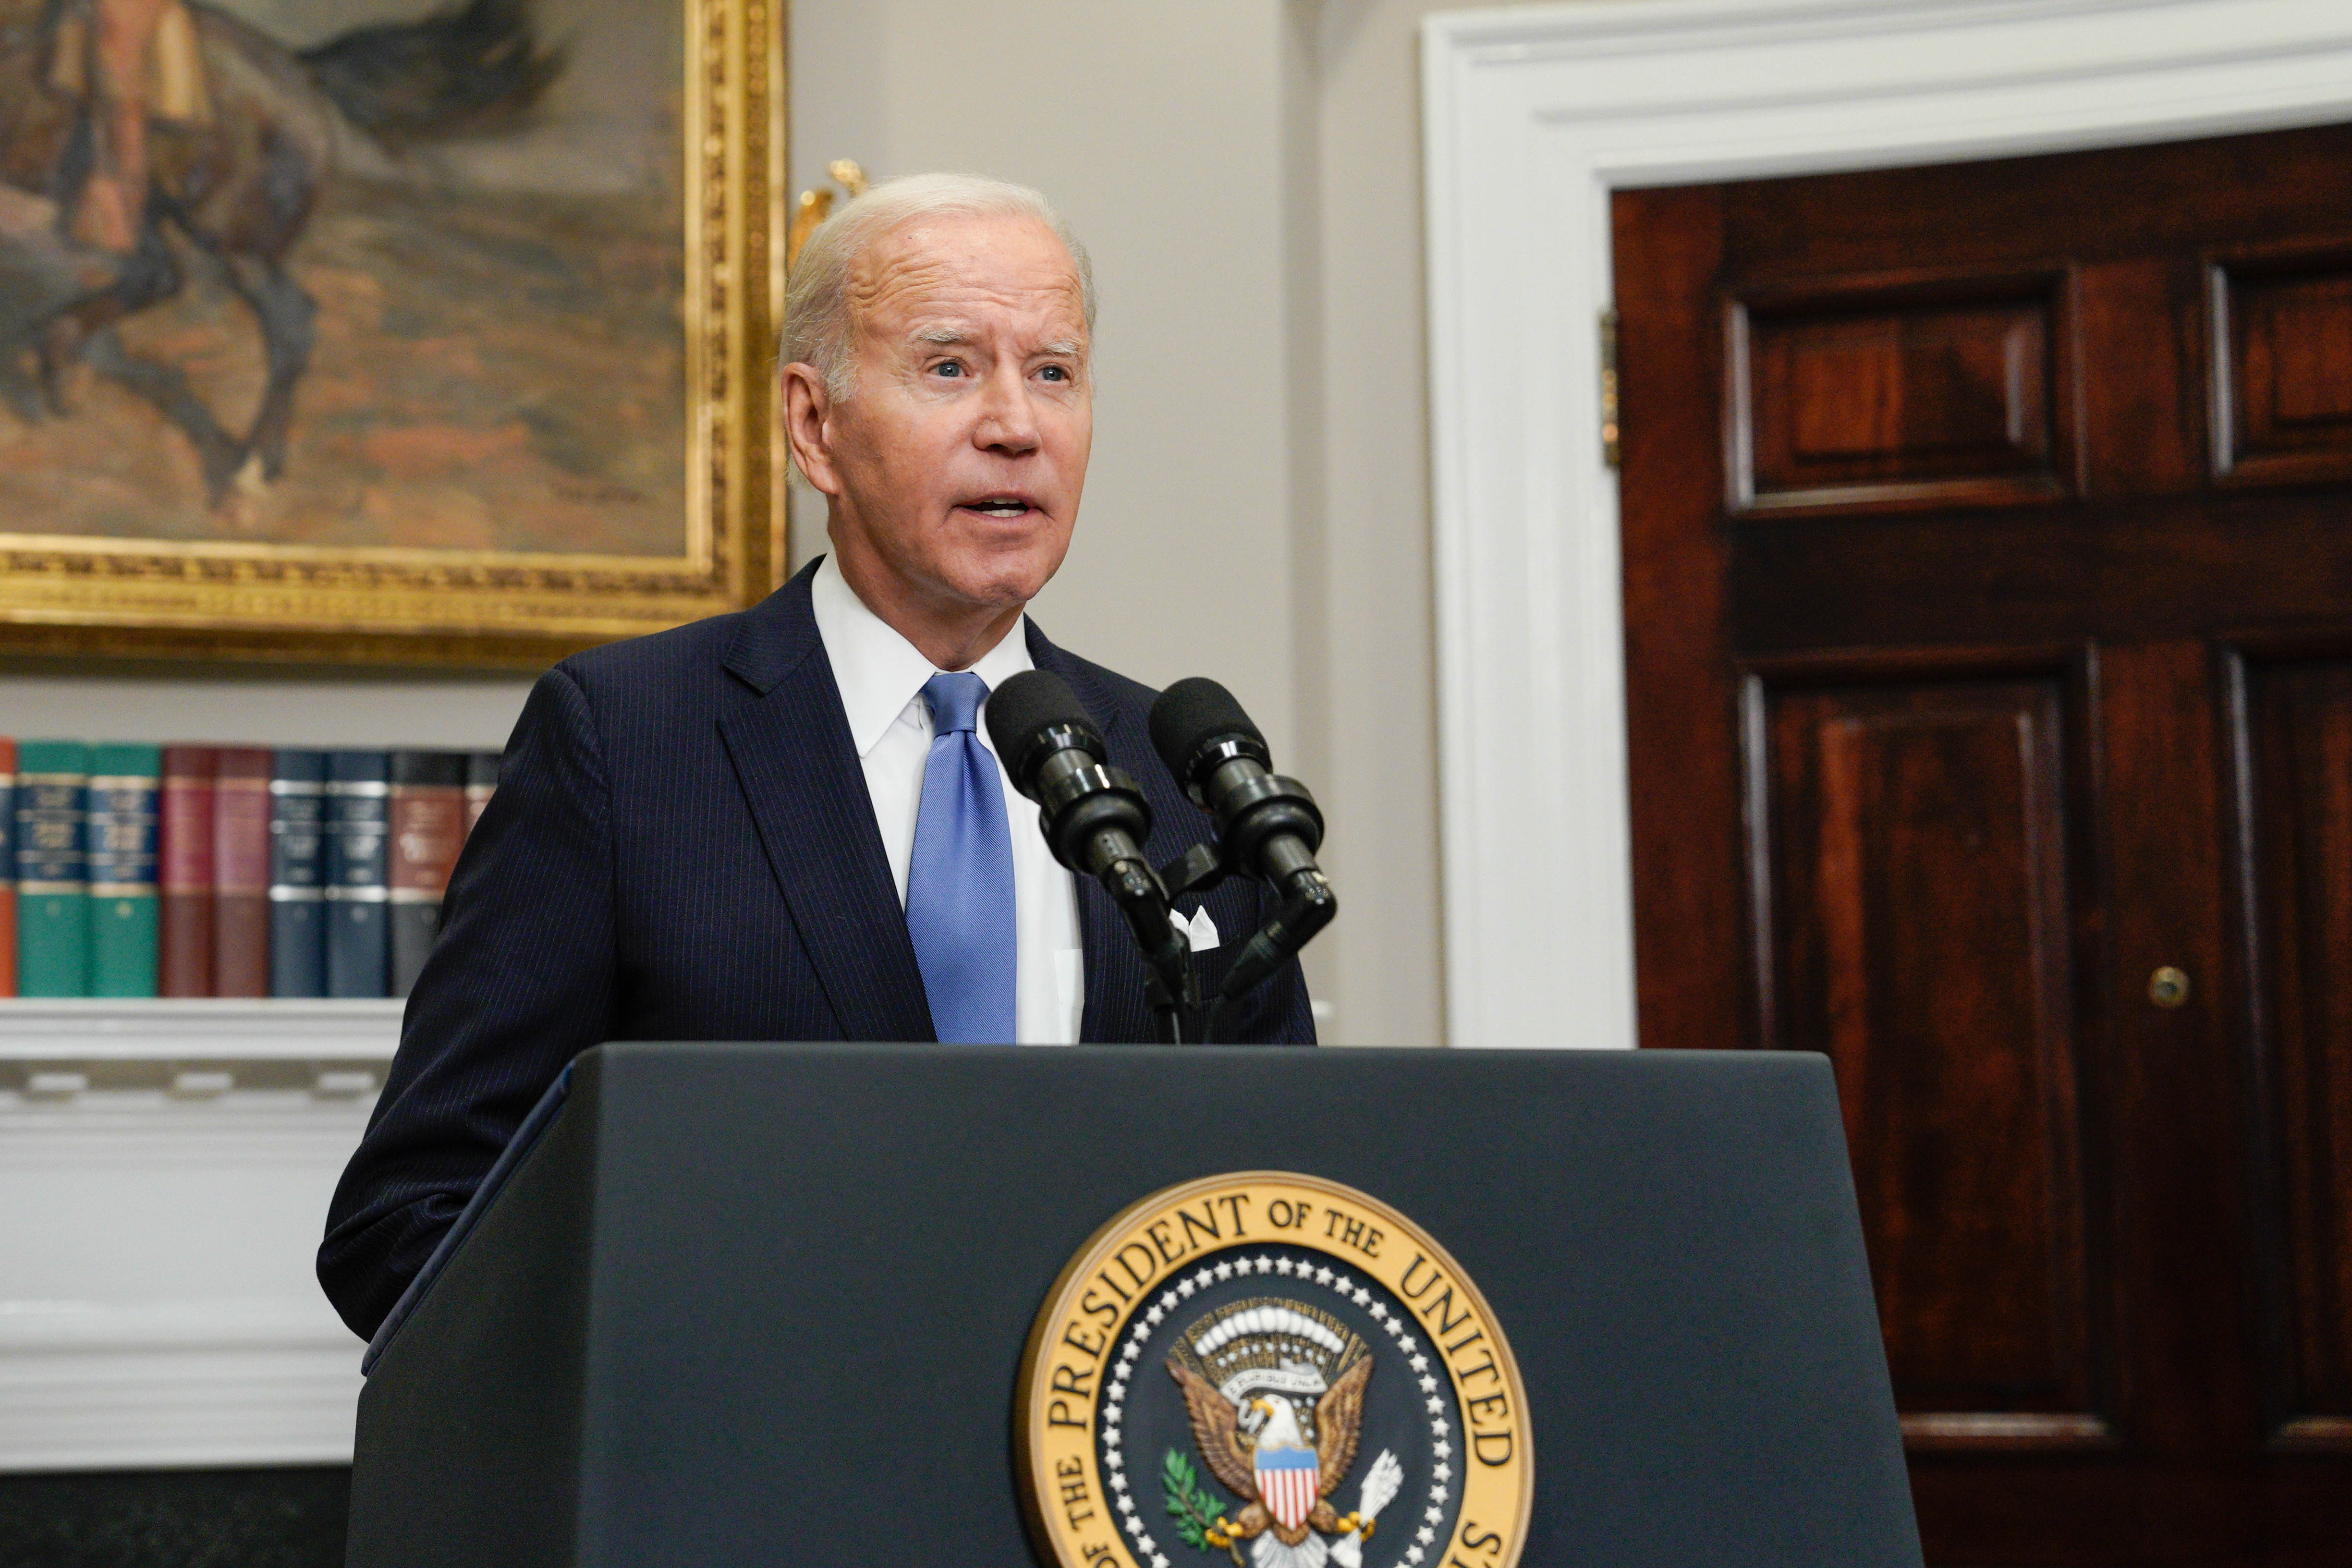 The Biden administration helped secure the release of seven Americans in Venezuela.